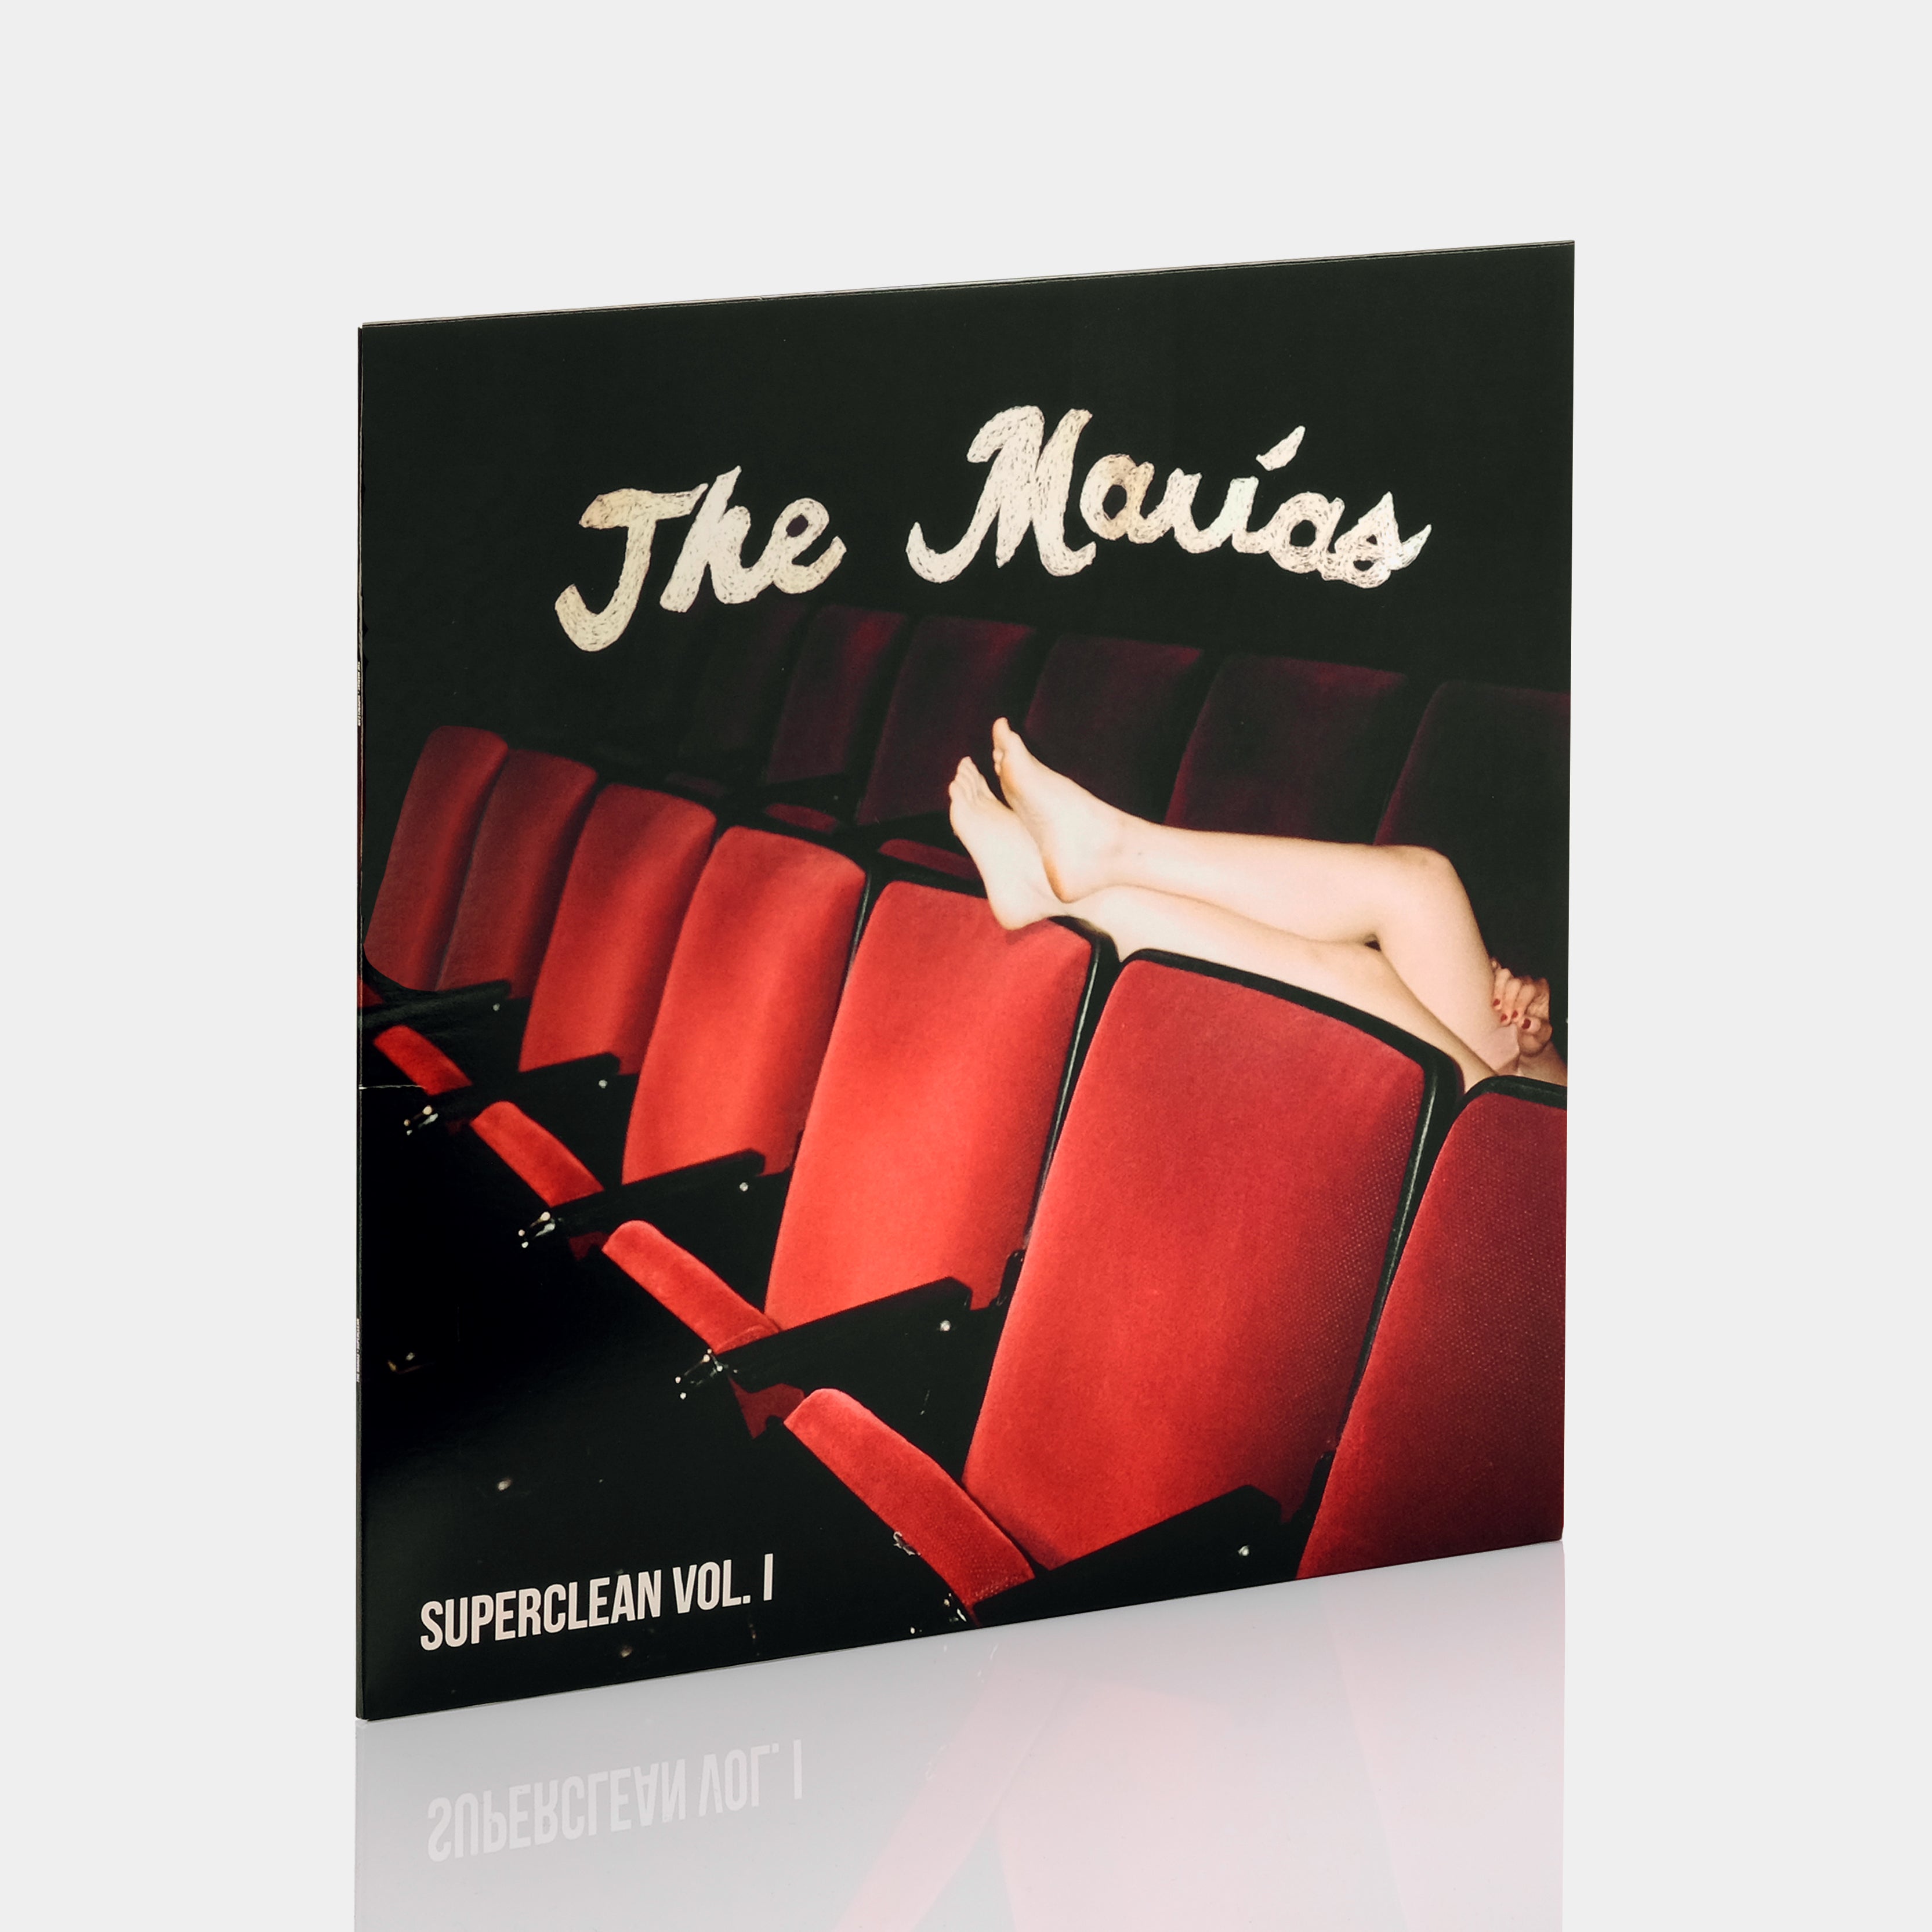 The Marías - Superclean Vol. I & Superclean Vol. II (Limited Edition Reissue) LP Translucent Red Vinyl Record